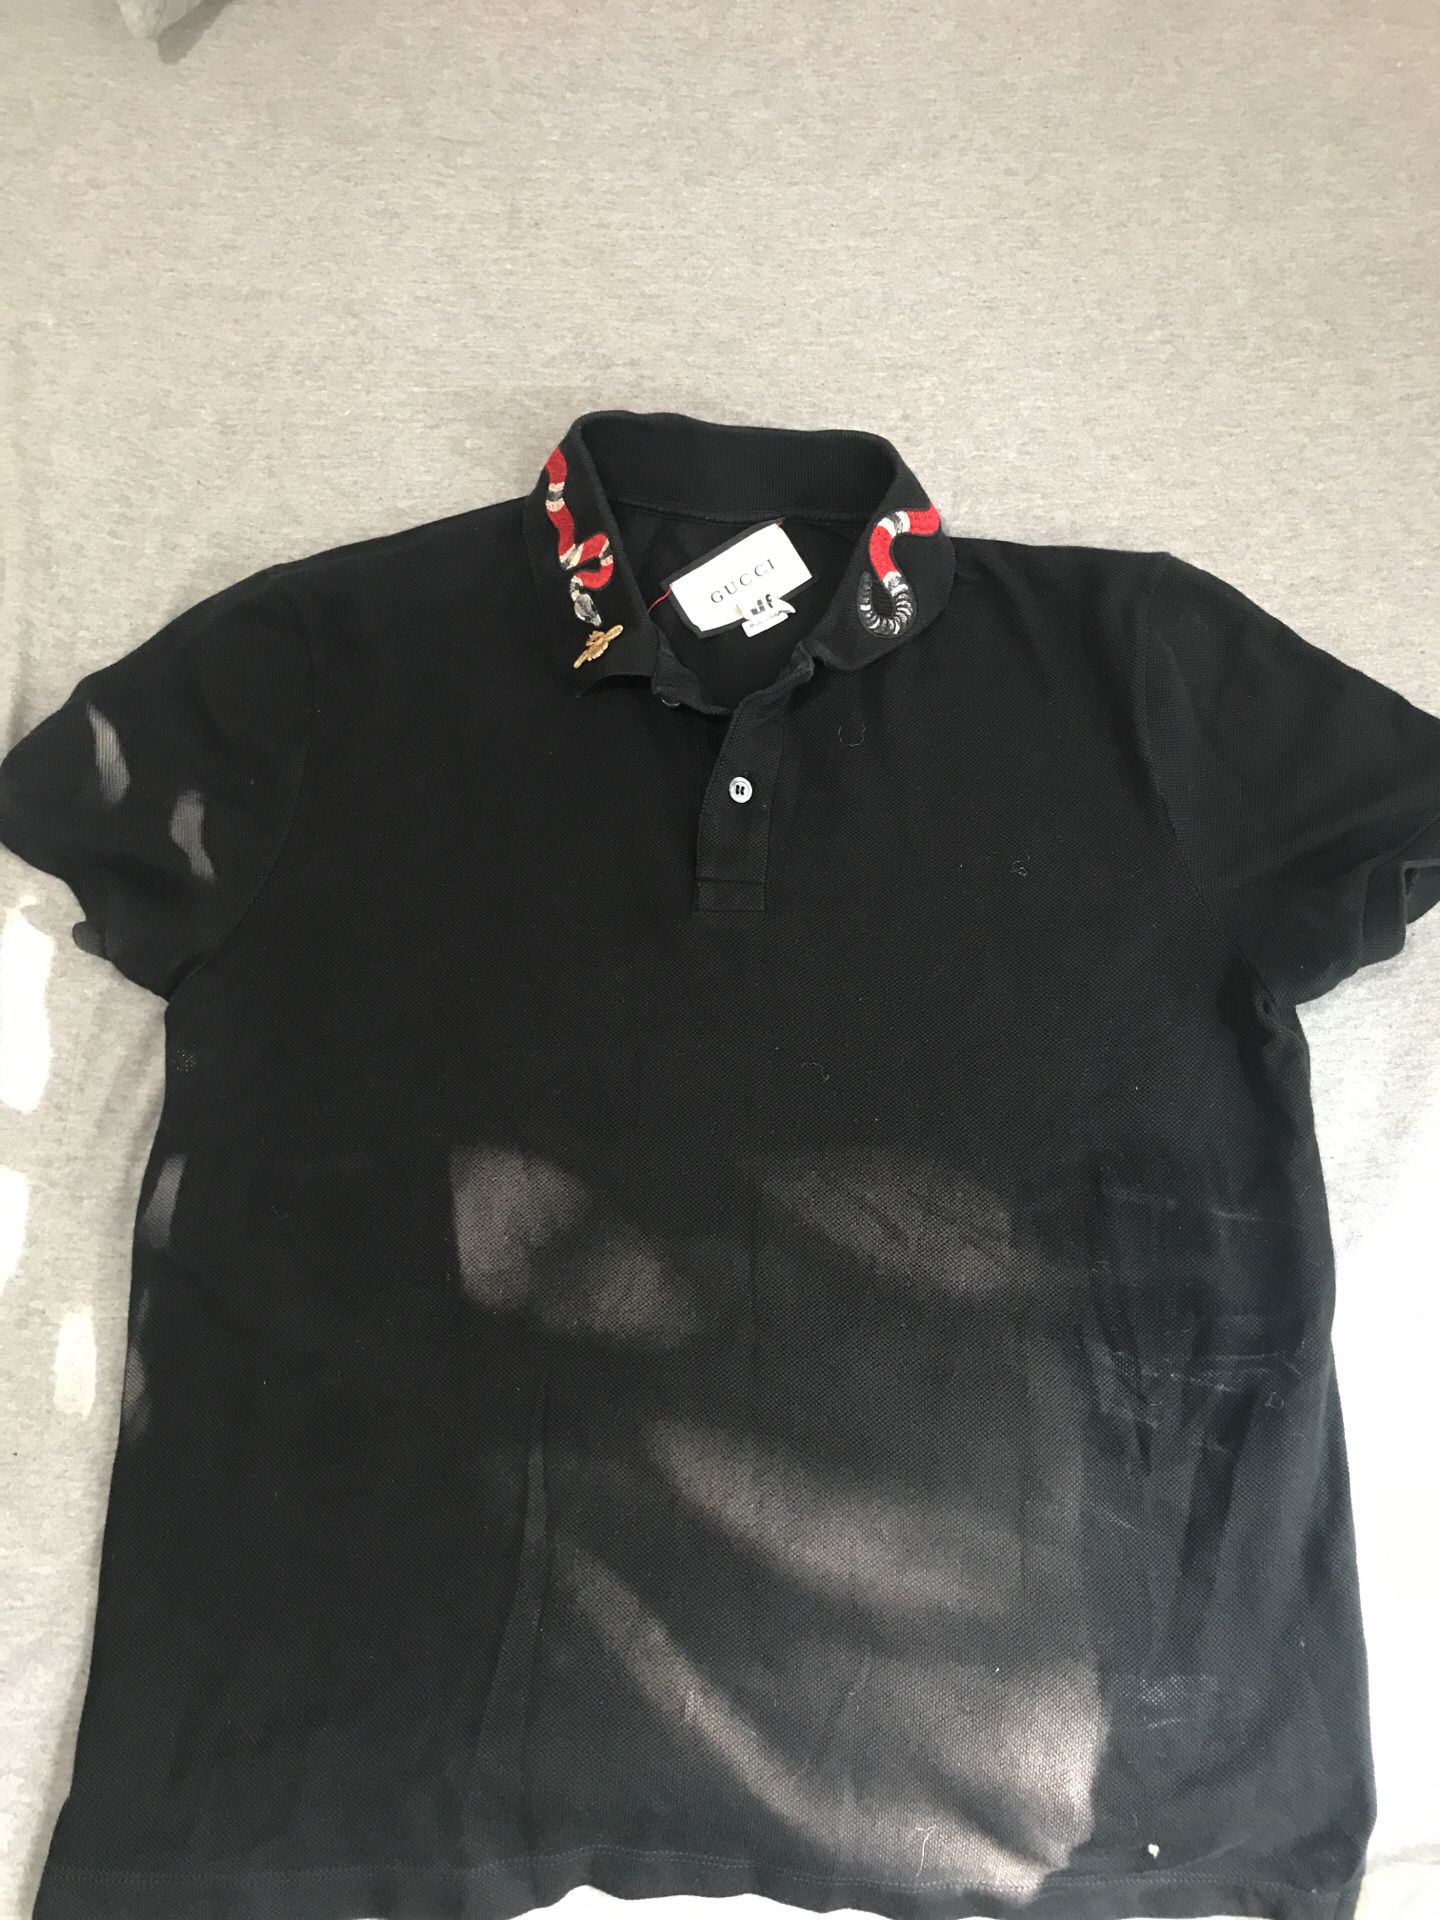 Gucci snake collar shirt in Springfield, PA - OfferUp